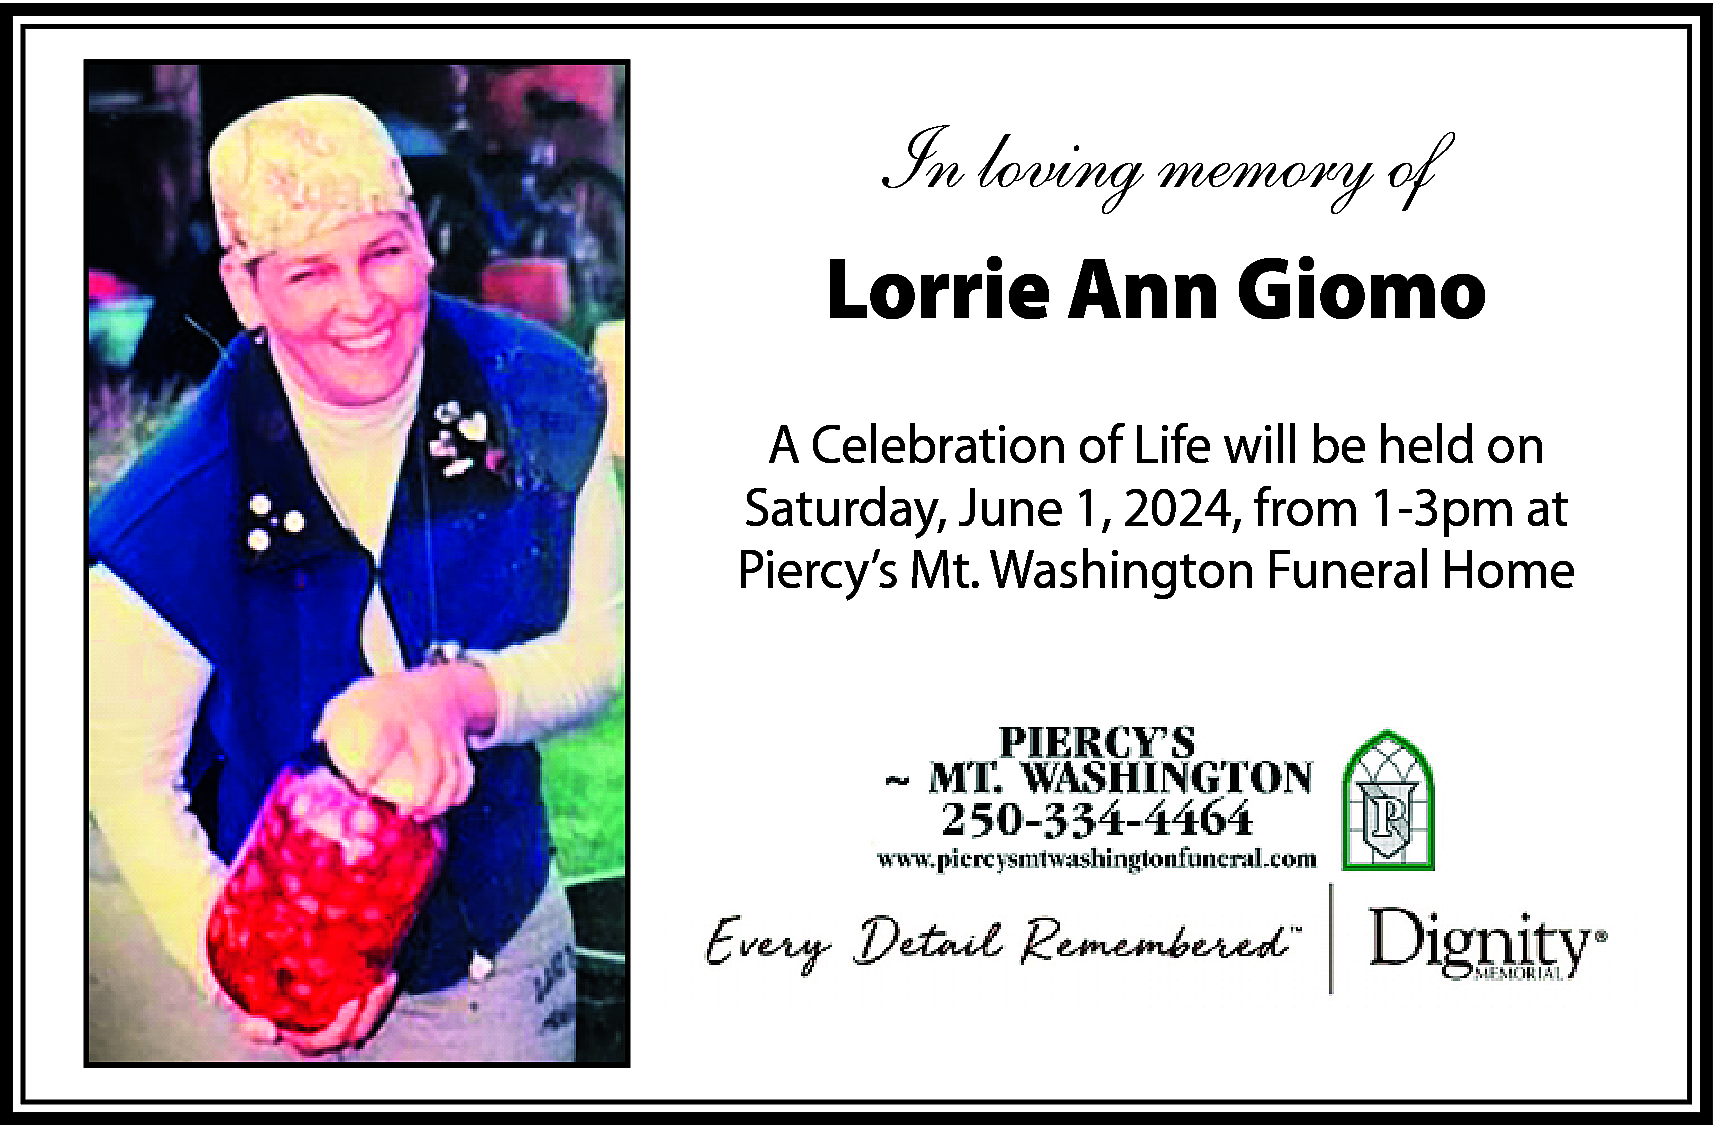 In loving memory of <br>Lorrie  In loving memory of  Lorrie Ann Giomo  A Celebration of Life will be held on  Saturday, June 1, 2024, from 1-3pm at  Piercy’s Mt. Washington Funeral Home    